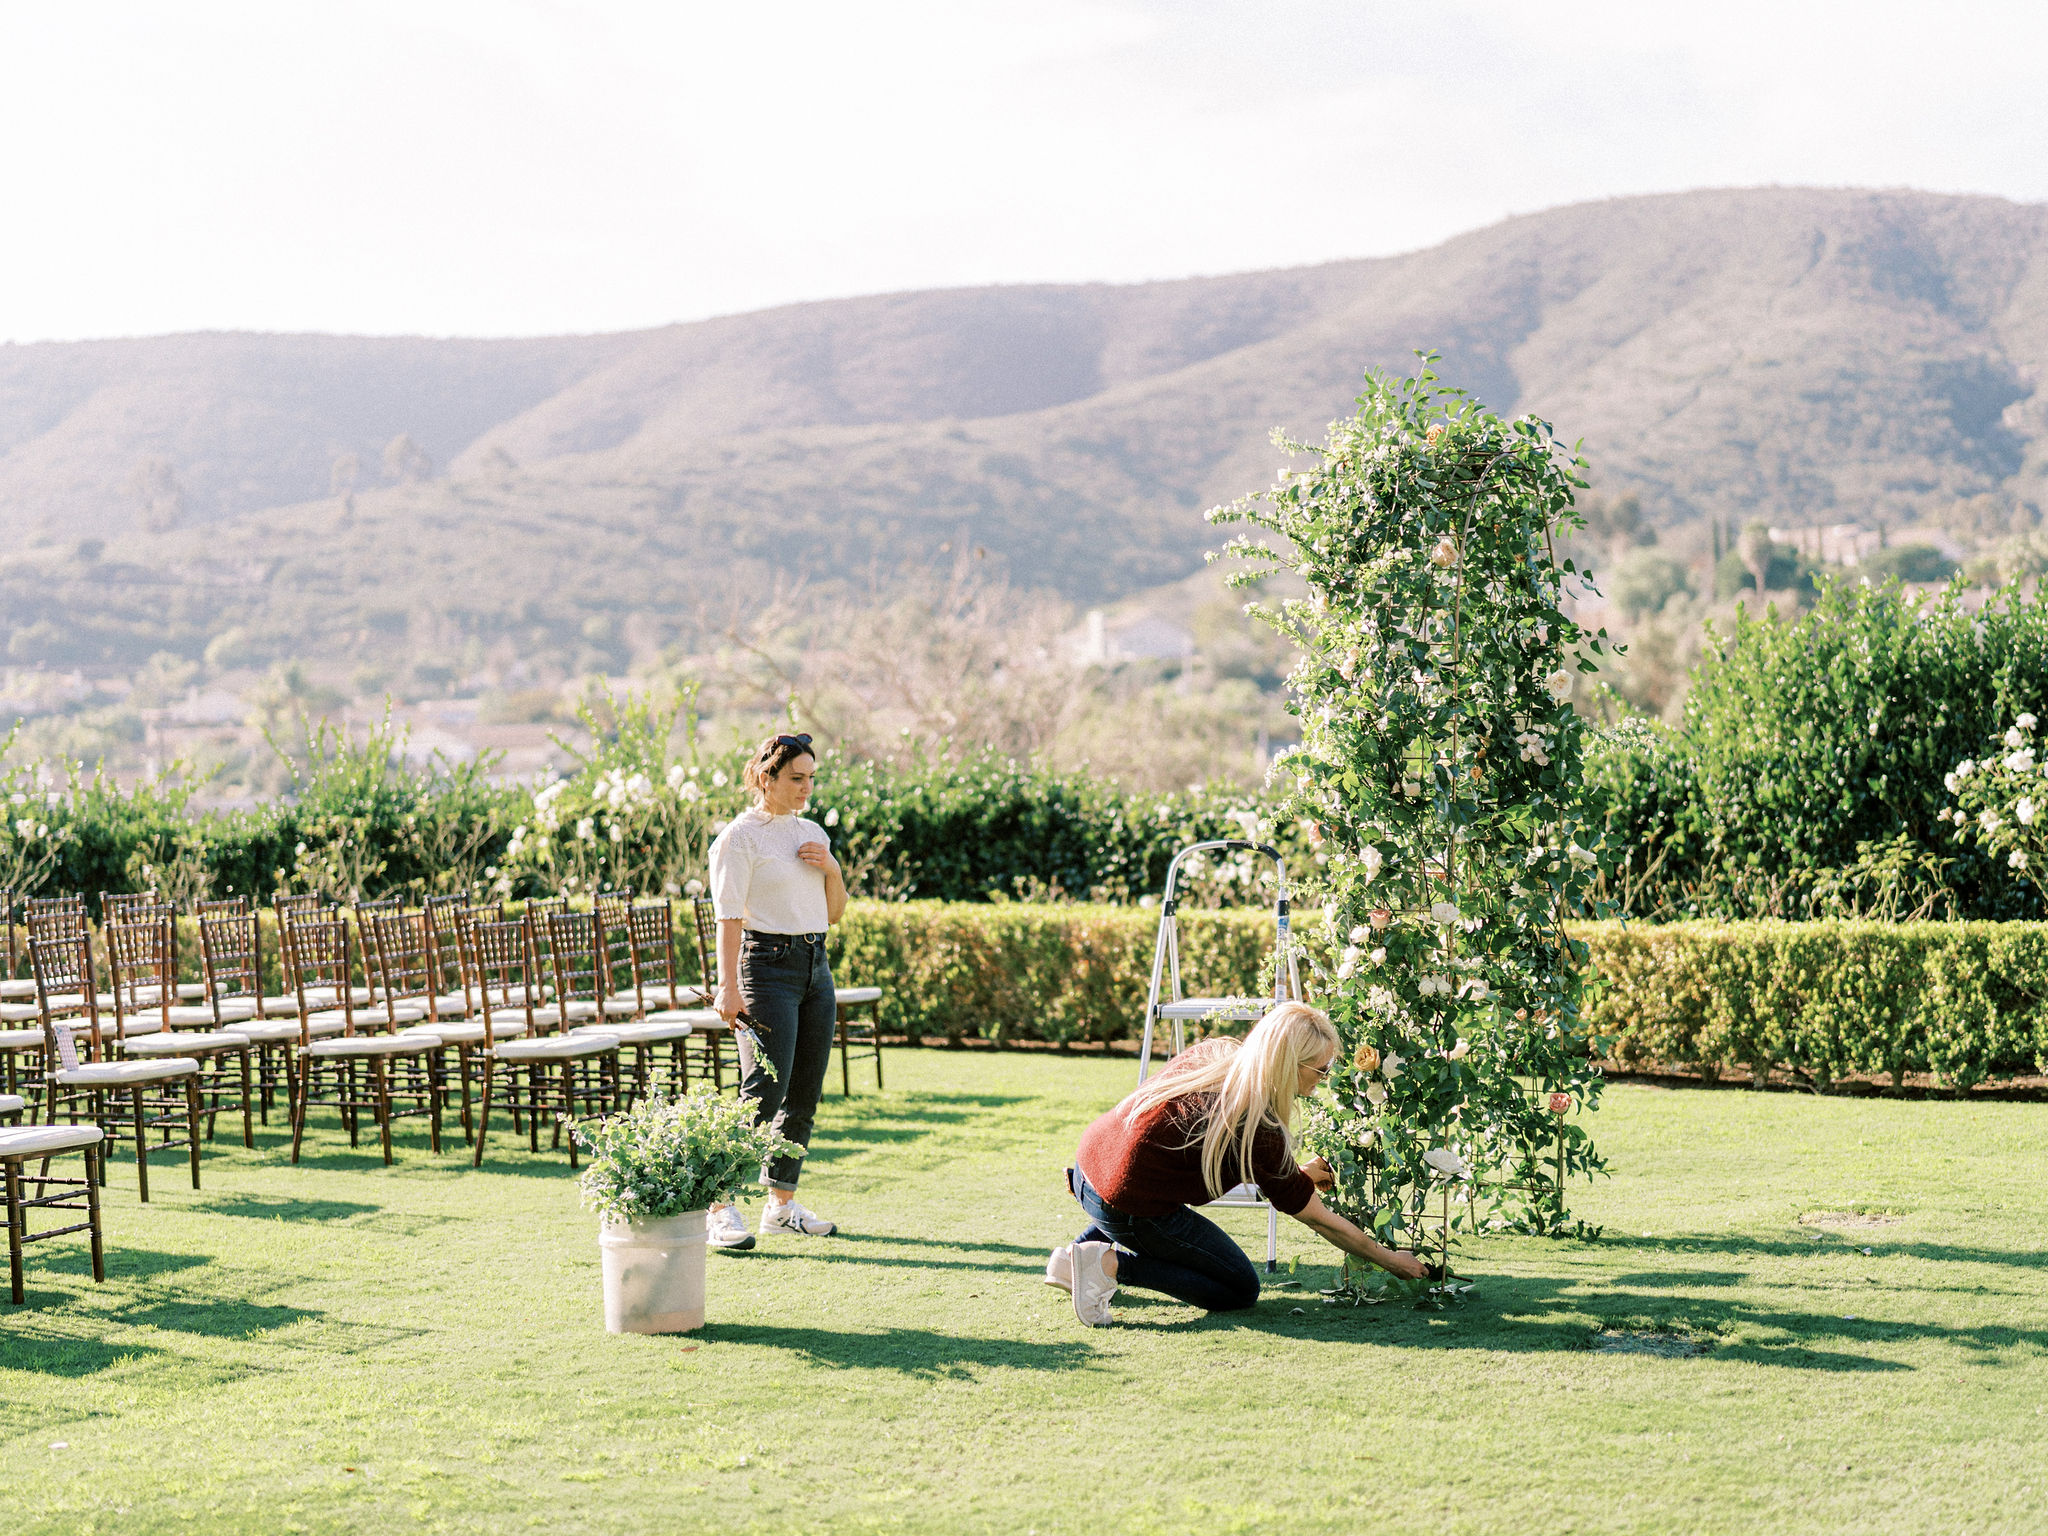 SISTI & CO. setting up for a Twin Oaks wedding in the outside garden ceremony area.